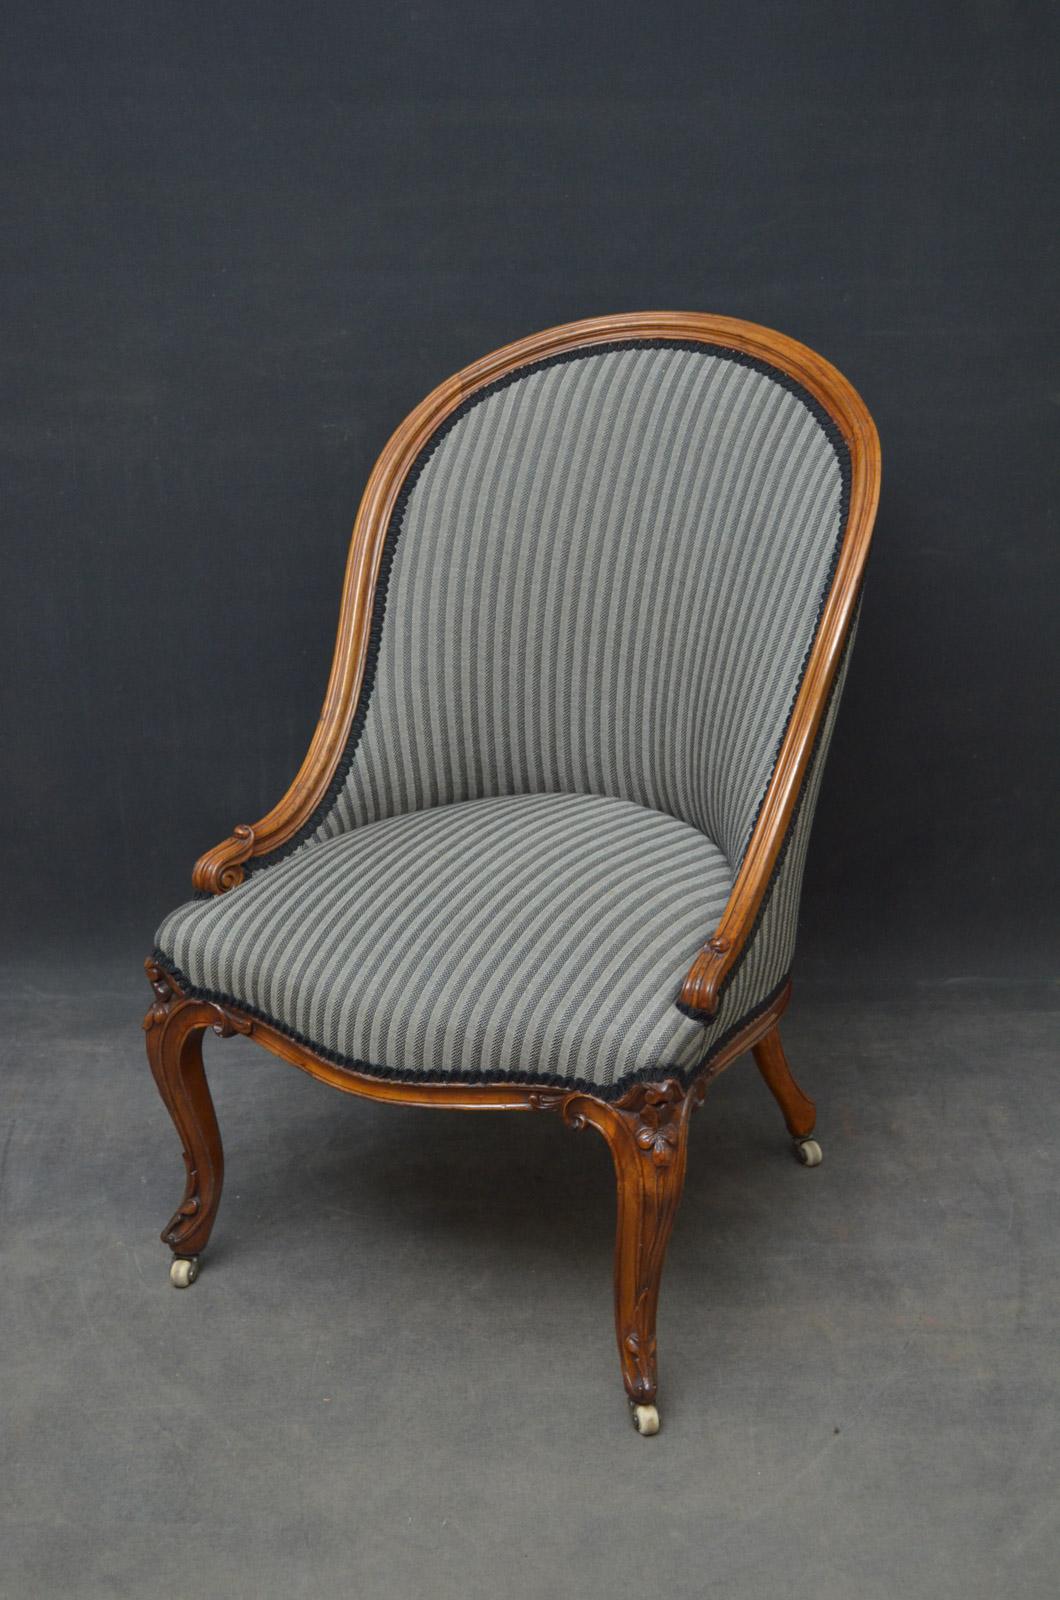 Sn4556 Victorian walnut spoonback armchair with moulded and carved frame, serpentine front rail and carved cabriole legs, standing on original brass castors. This antique armchair retains its original finish, color and patina with new sprung seat